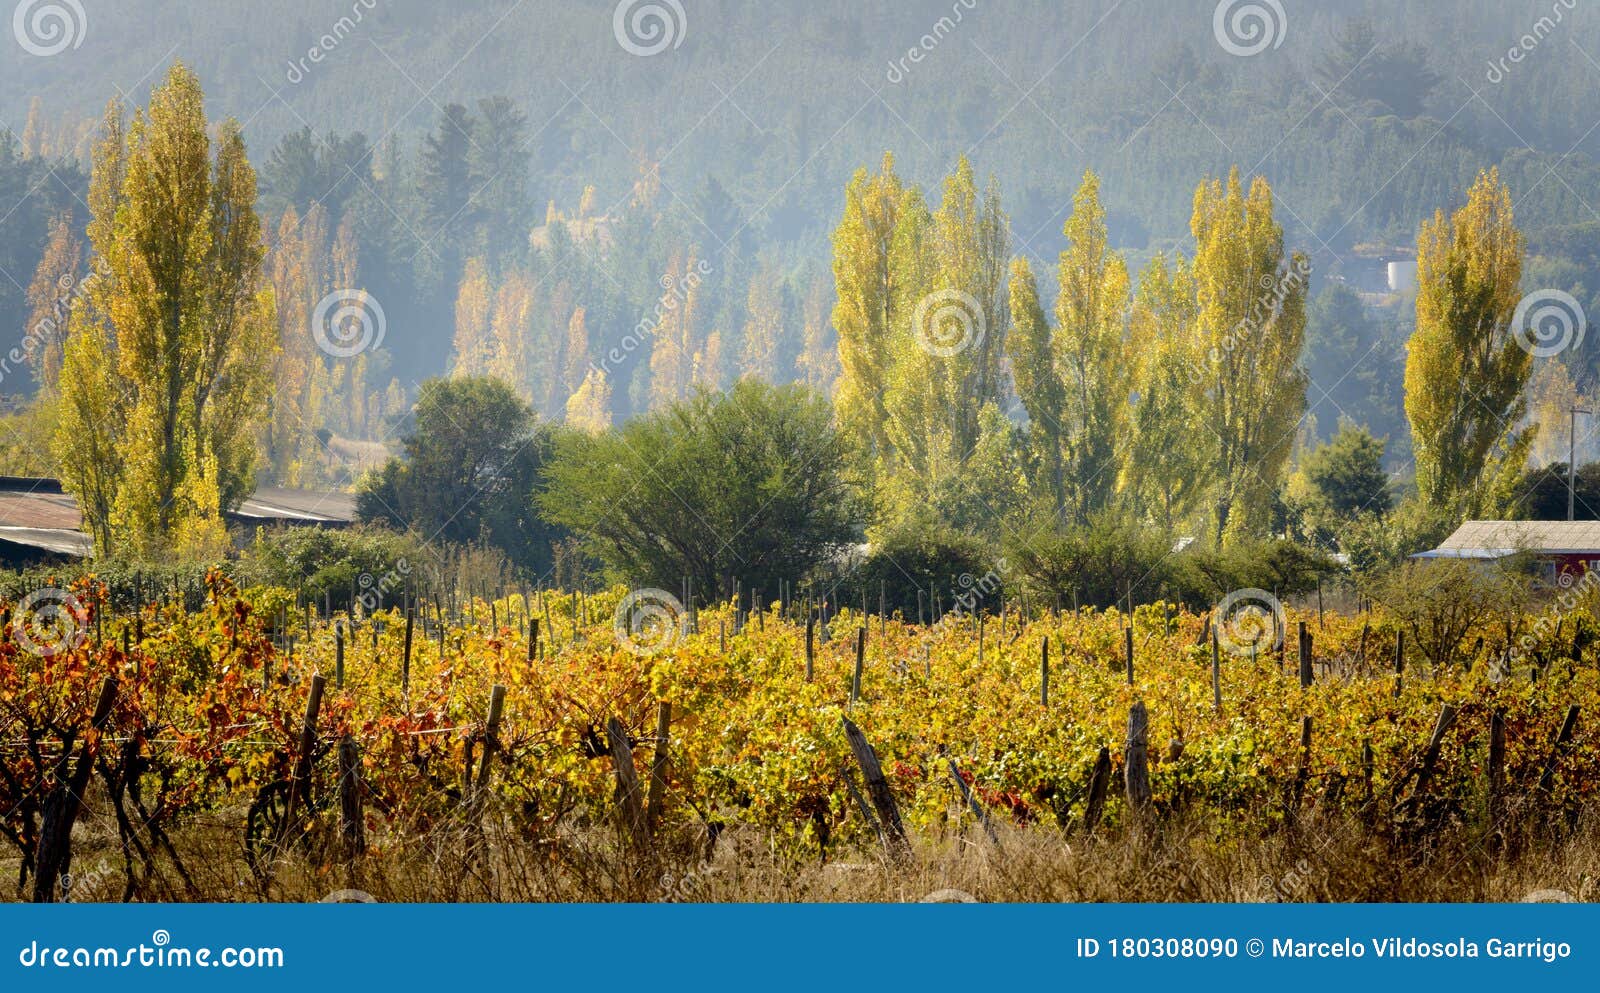 wine-growing landscape in autumn, itata valley. chile